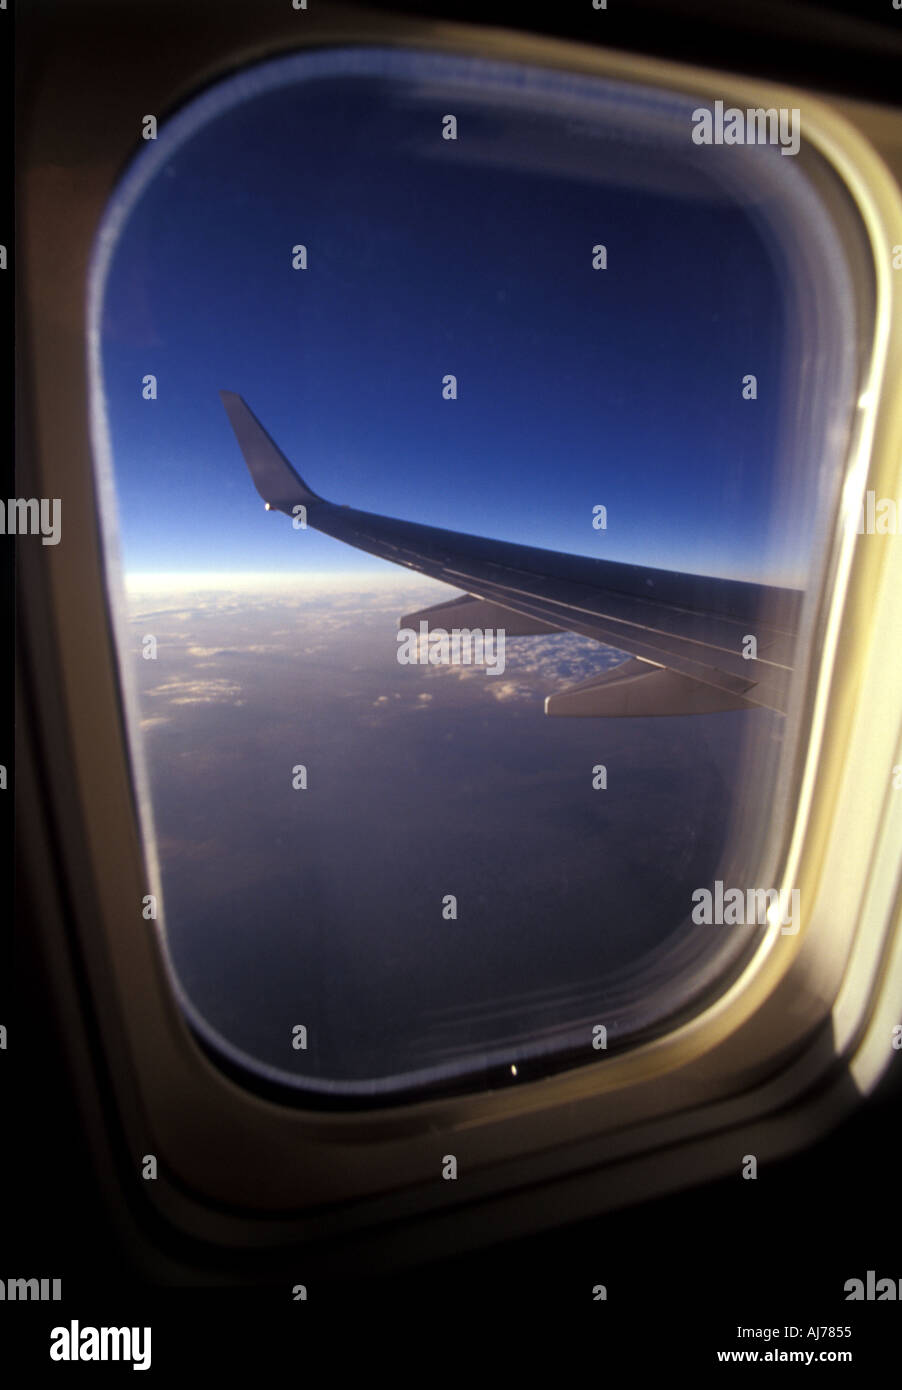 hi high altitude comercial jet wing window seat 2367 Stock Photo